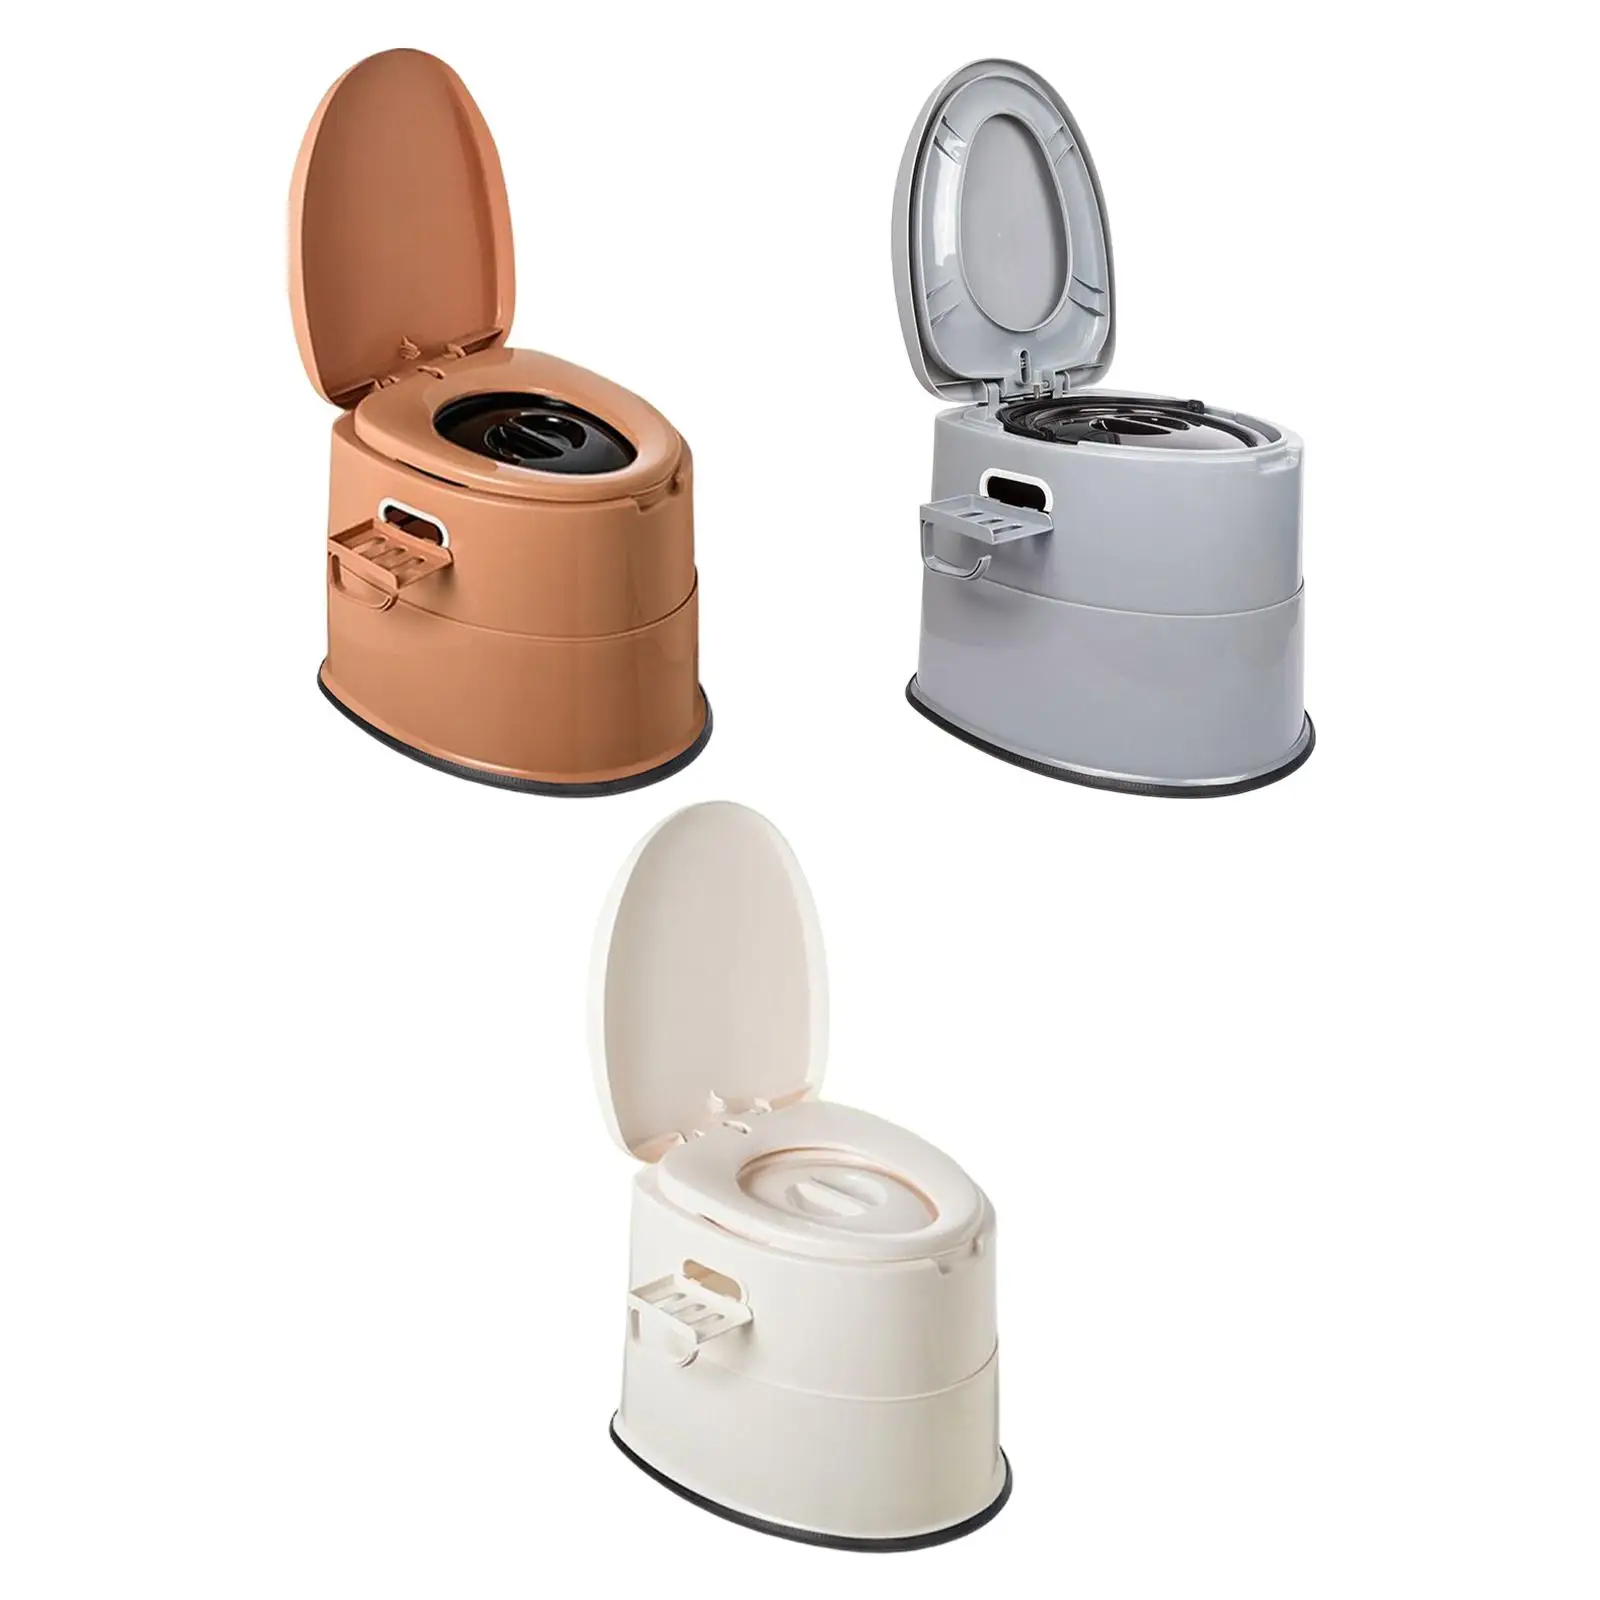 Travel Toilet Mobile Potty Removable Toilet Paper Holder Waterproof Portable Toilet for Adults for Camping Travel RV Boat Home